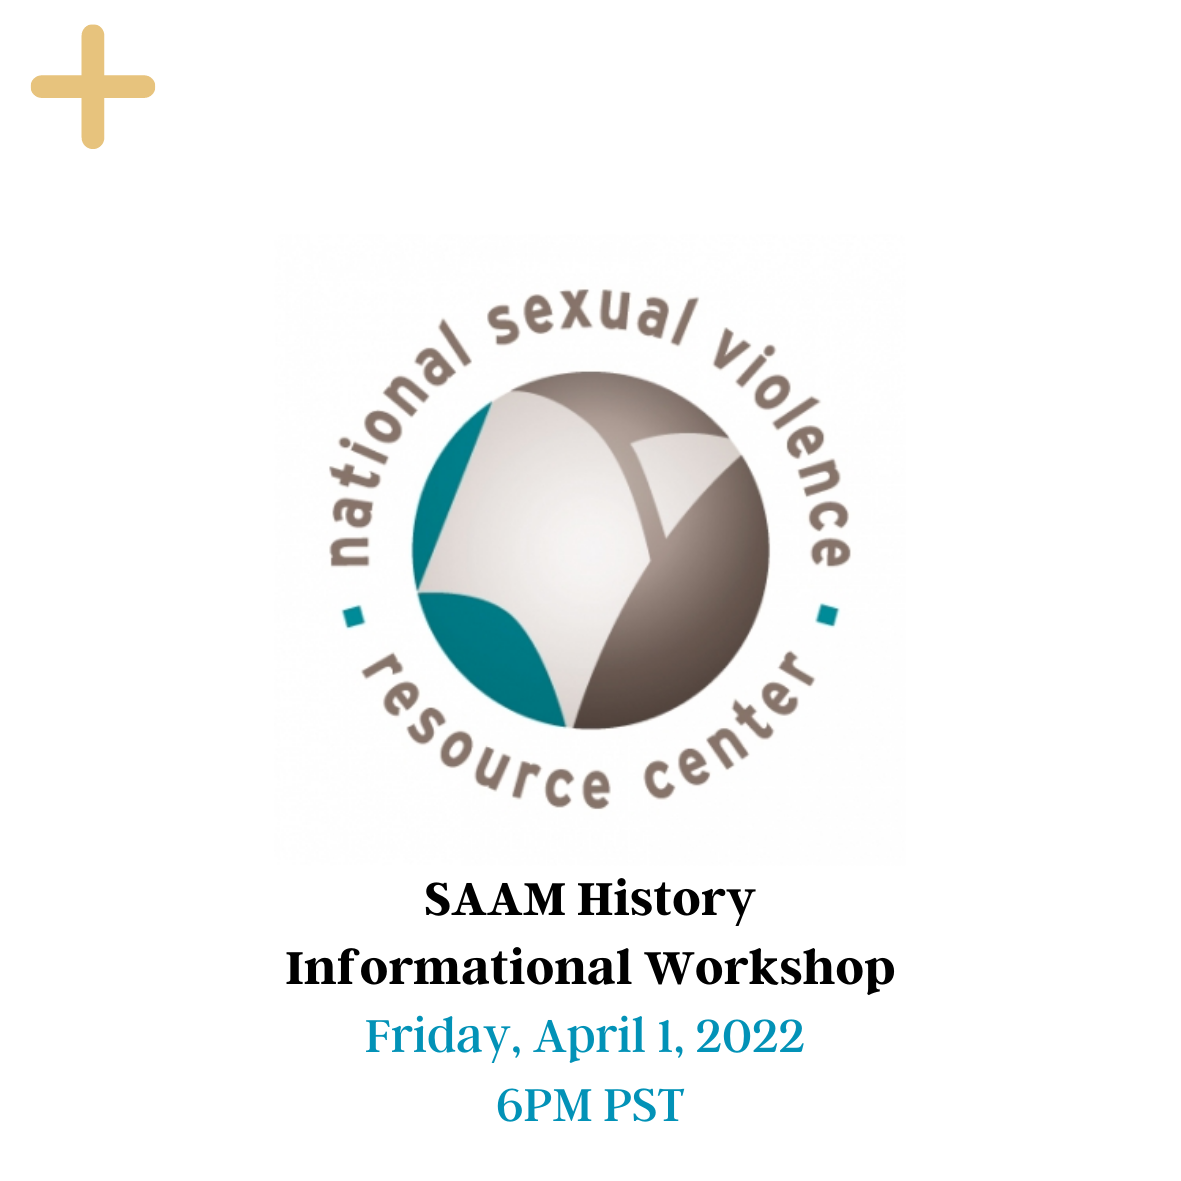 SAAM History Informational Workshop cover page with the National Sexual Violence Resource Center logo displayed. The yellow button on the top can be clicked and will provide more information. The picture has date at the bottom: Friday, April 1, 2022 6PM PST